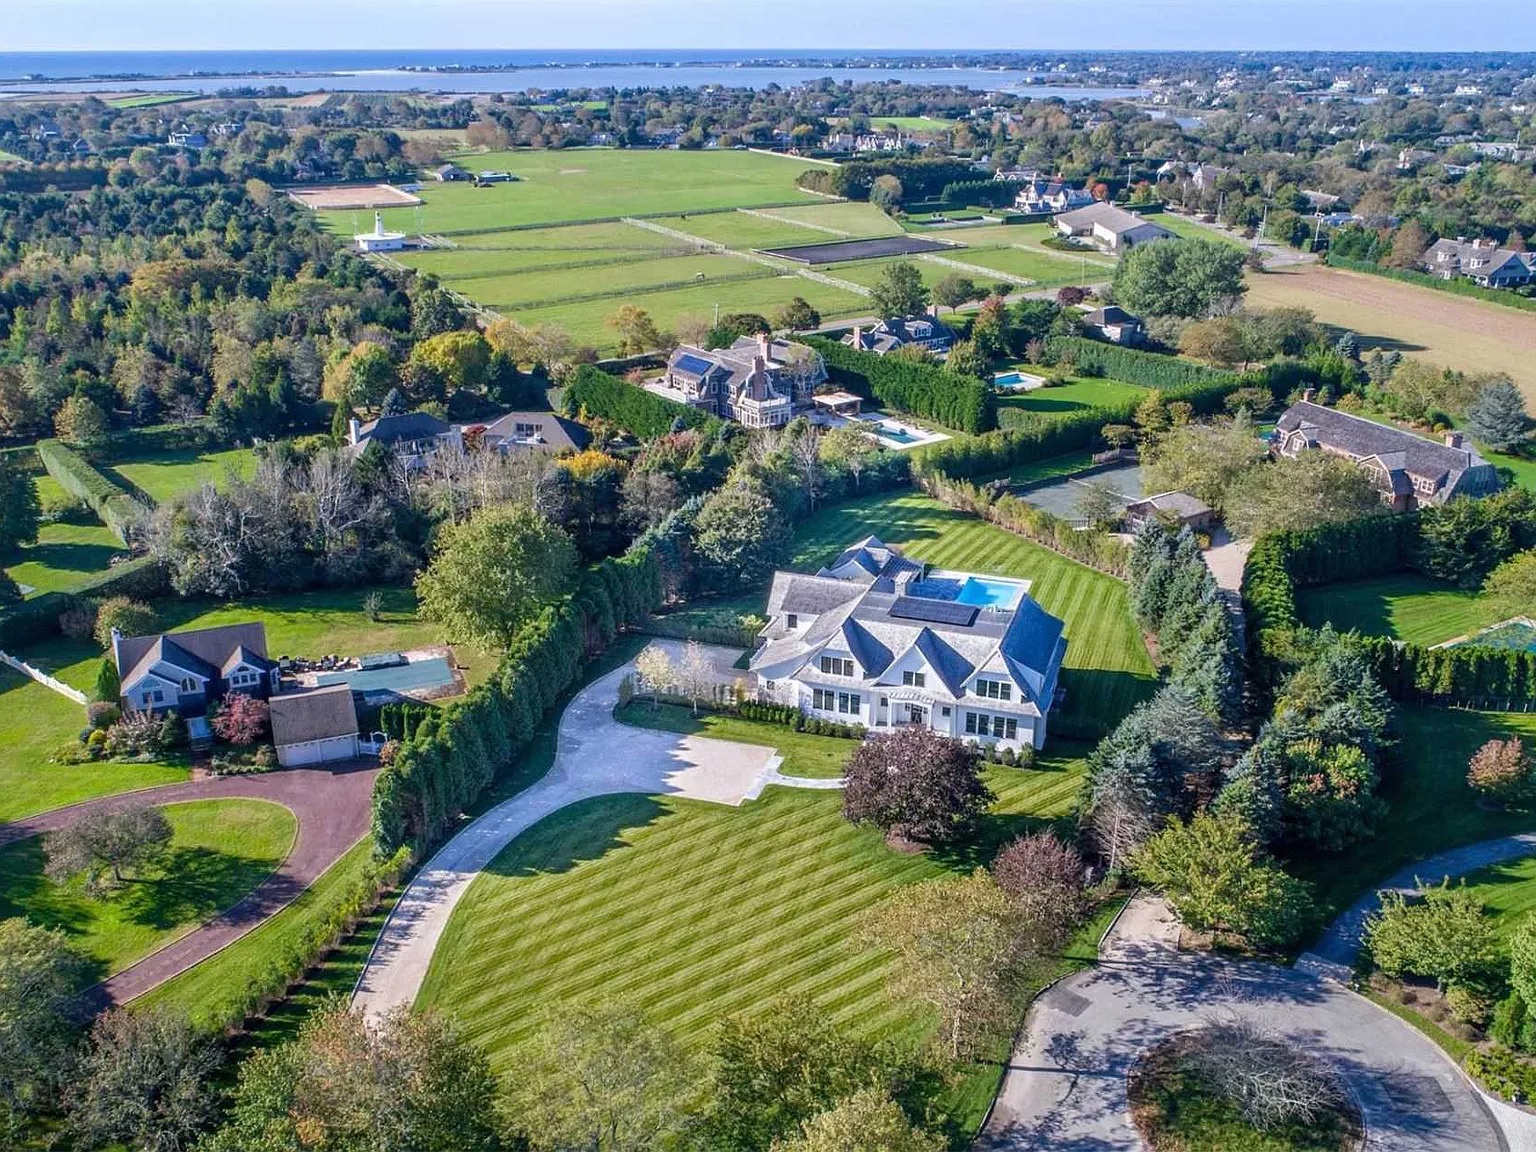 64 Jennifer Ln, Bridgehampton, NY 11932 - $9,450,000 home for sale, house images, photos and pics gallery